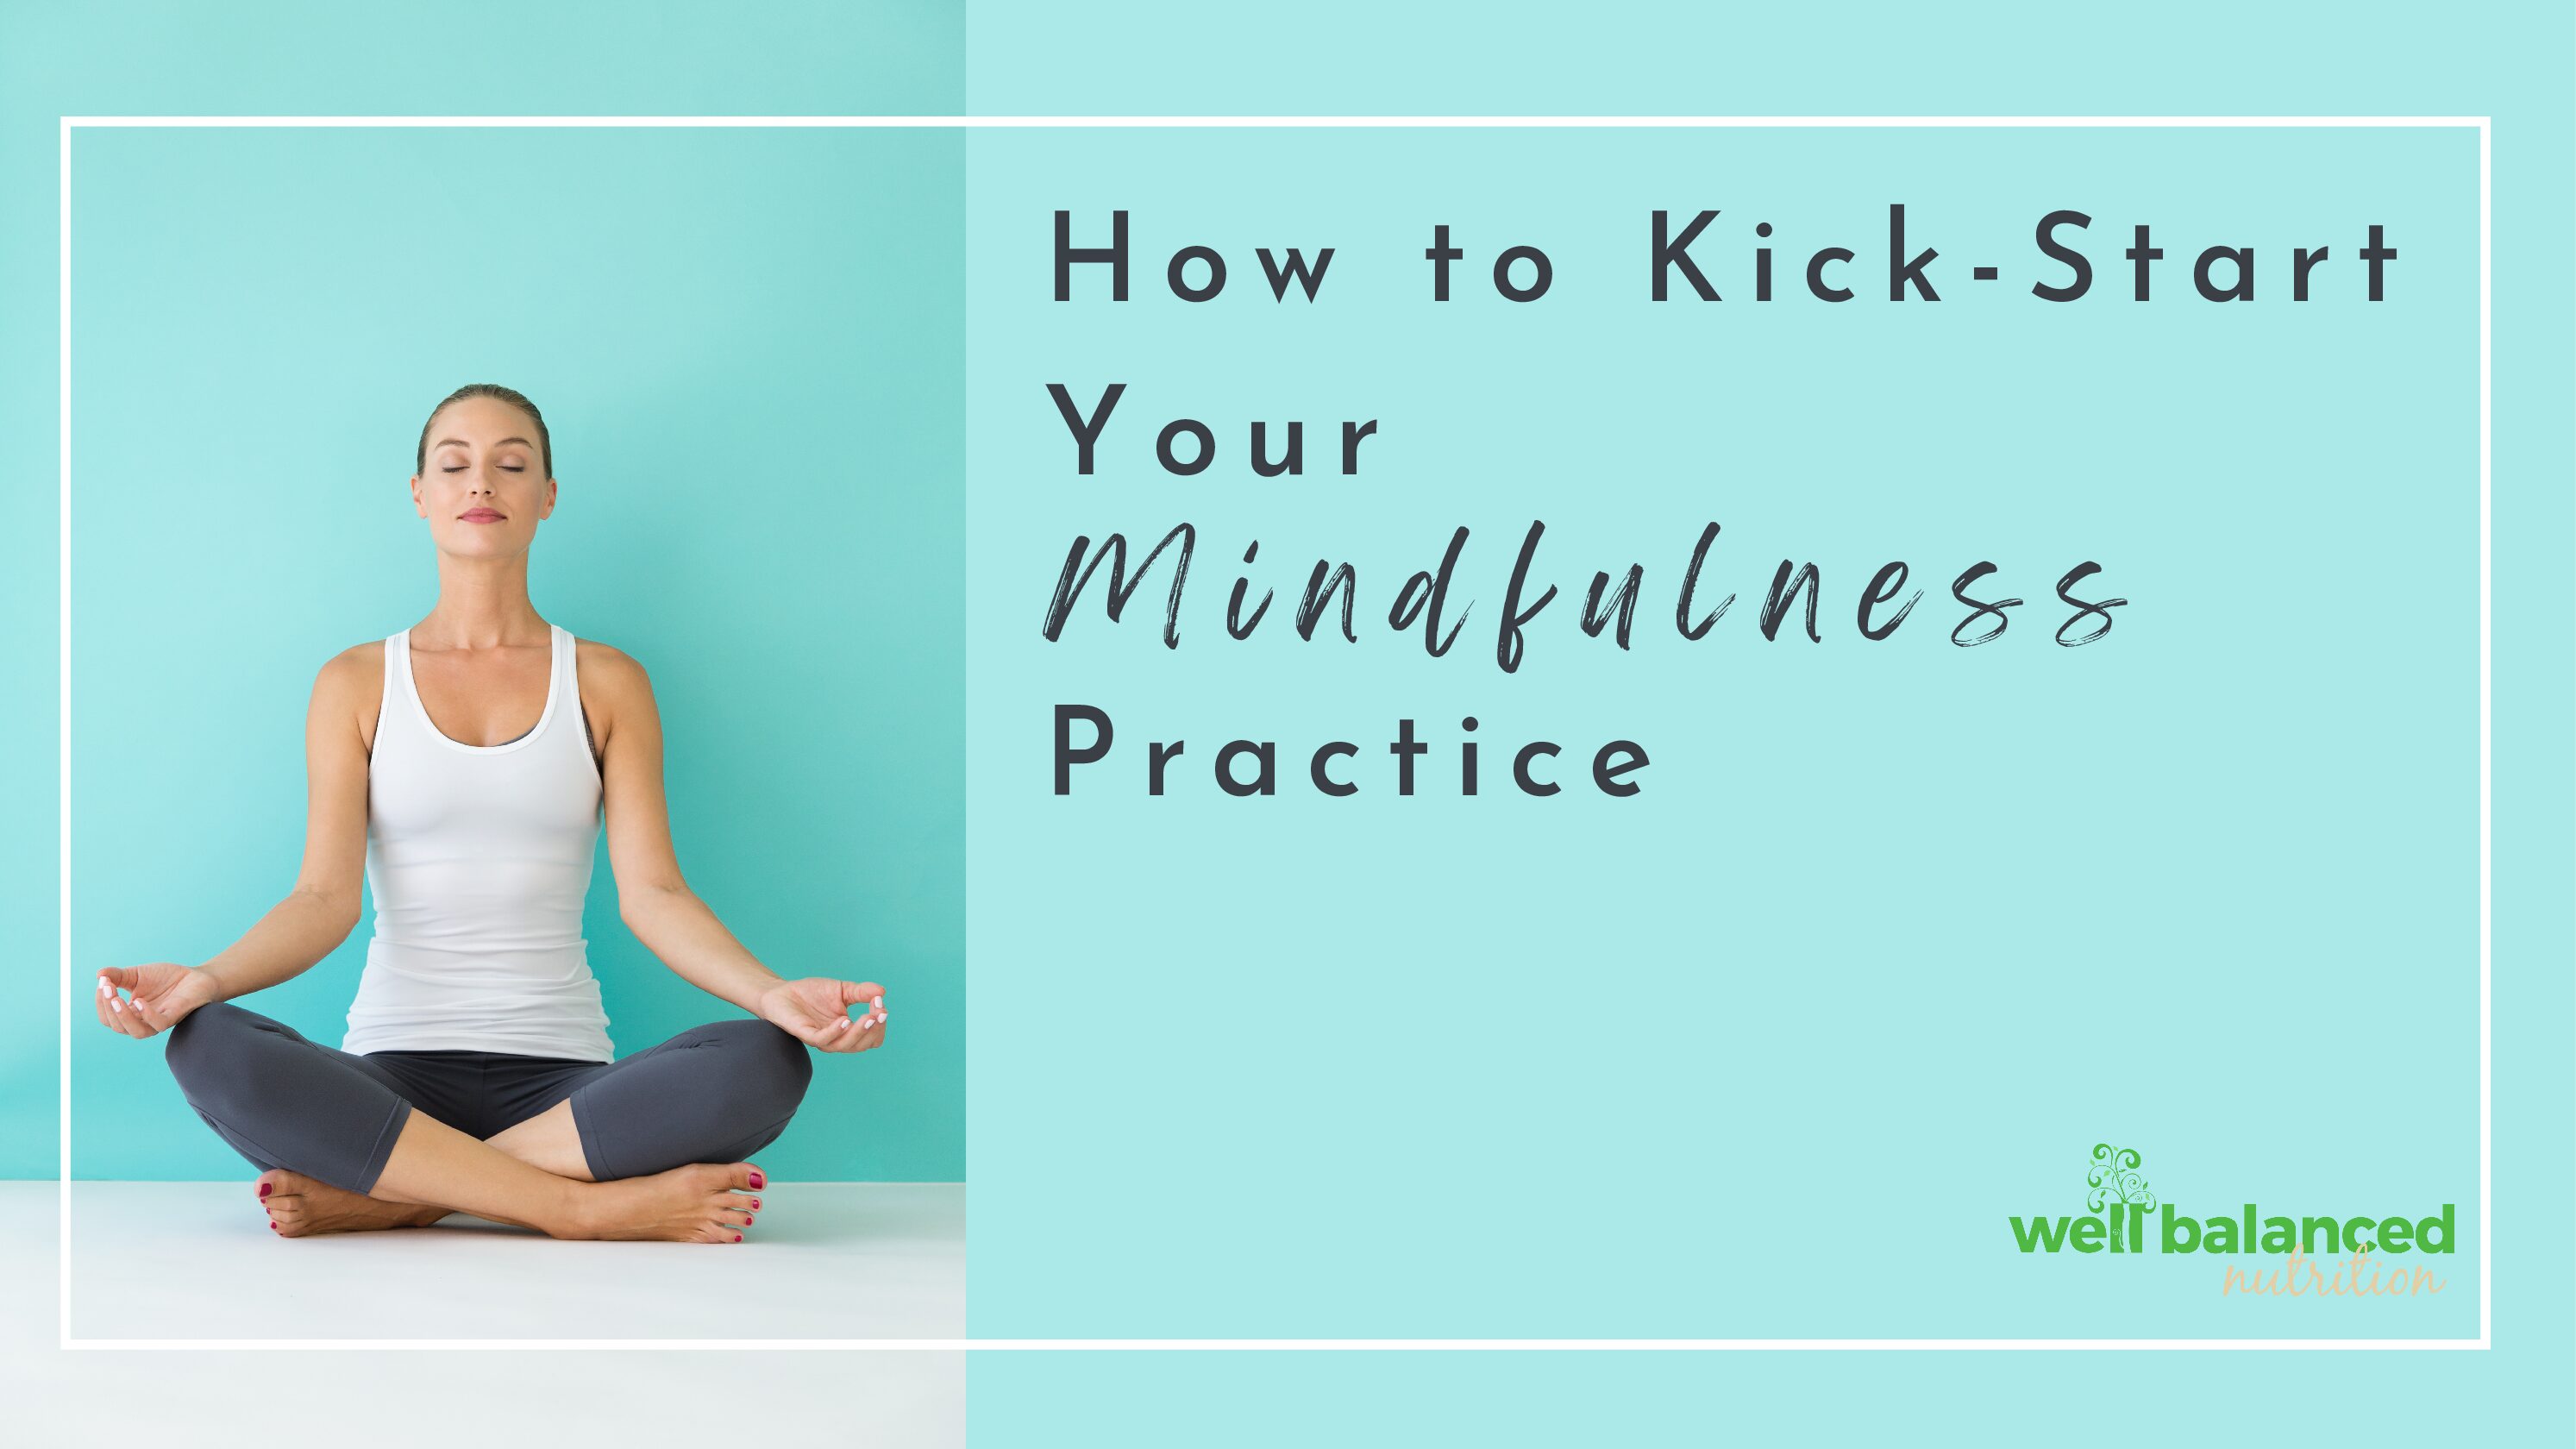 How do you practice mindfulness?